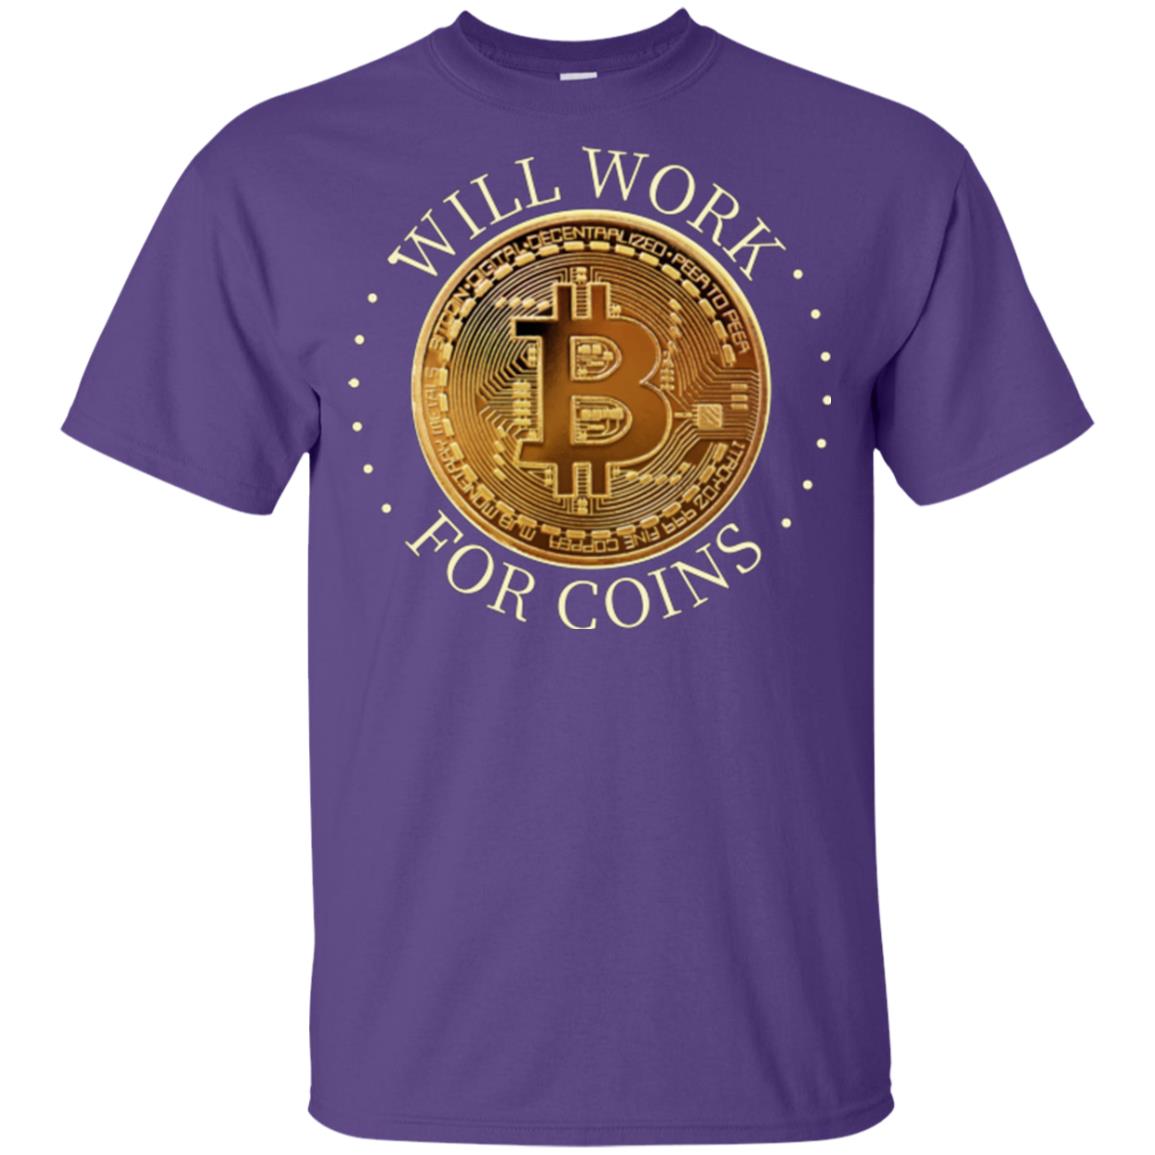 Will Work For Coins Gildan Youth Ultra Cotton Bitcoin T-Shirt - GoneBold.gift